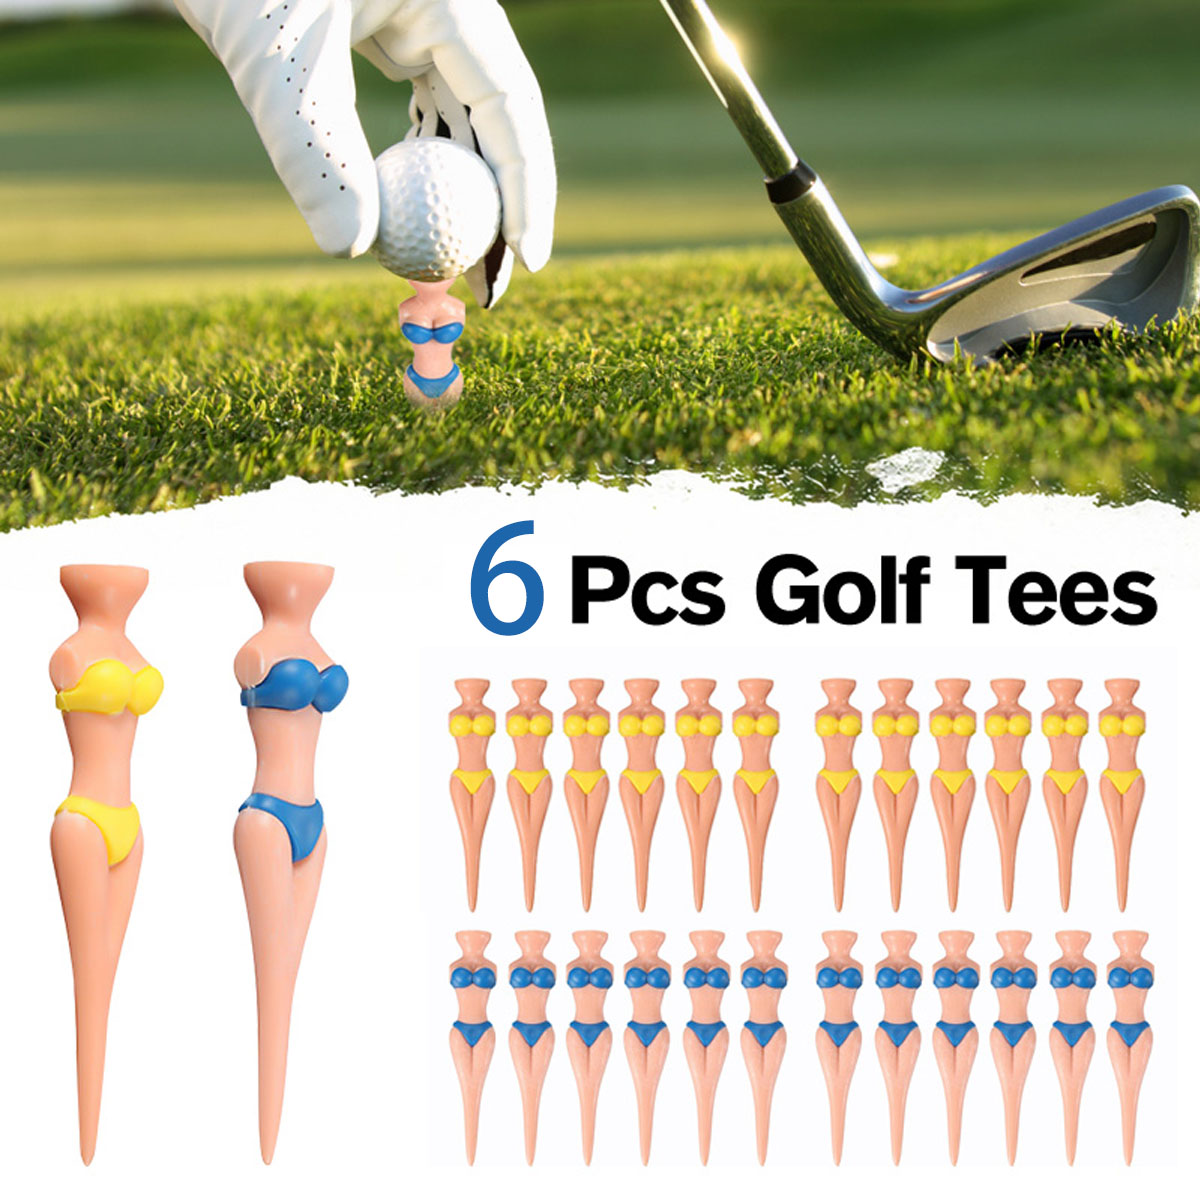 6Pcs-Lady-Novelty-Fashionable-Woman-Model-Golf-Mat-Tees-Divot-Tools-Gift-Stag-Party-Funny-Golf-Acces-1640752-1